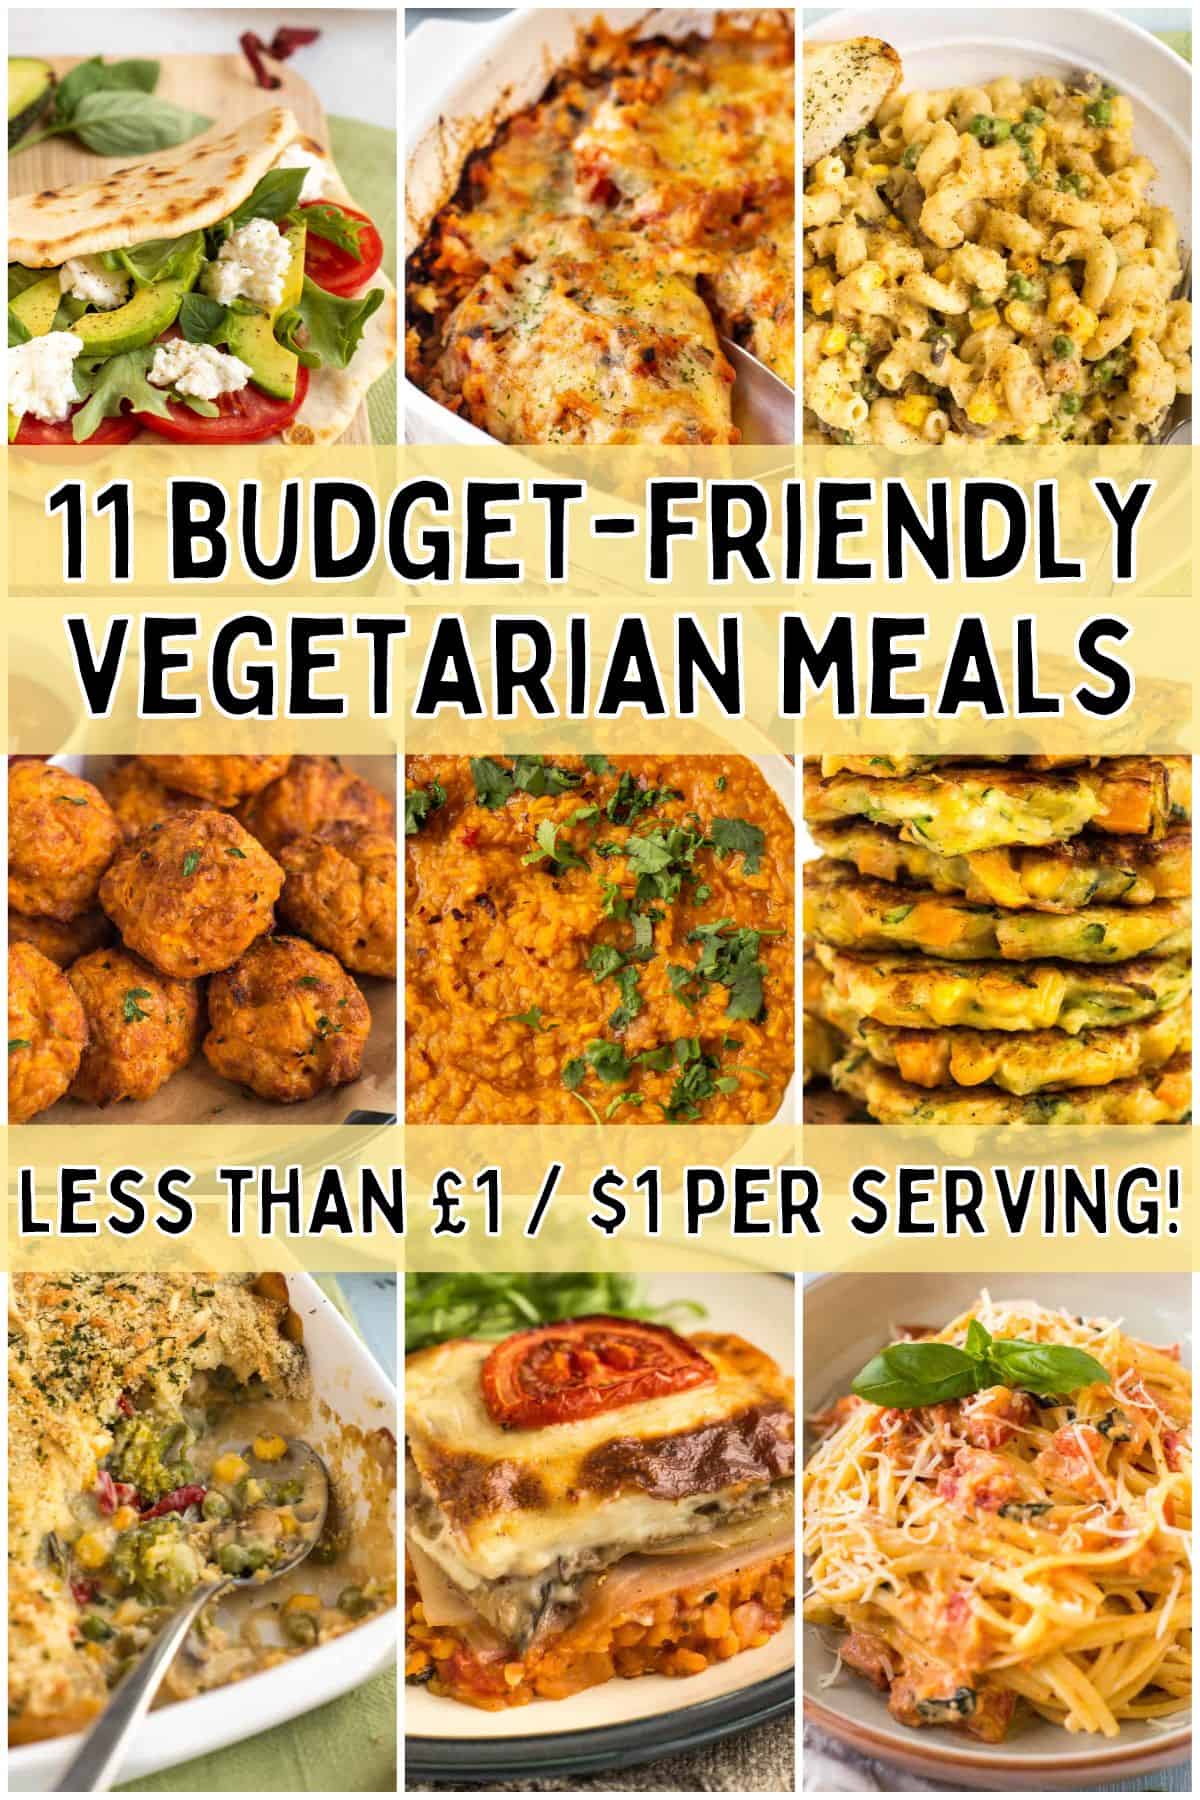 Collage showing cheap vegetarian meals, with a text overlay.